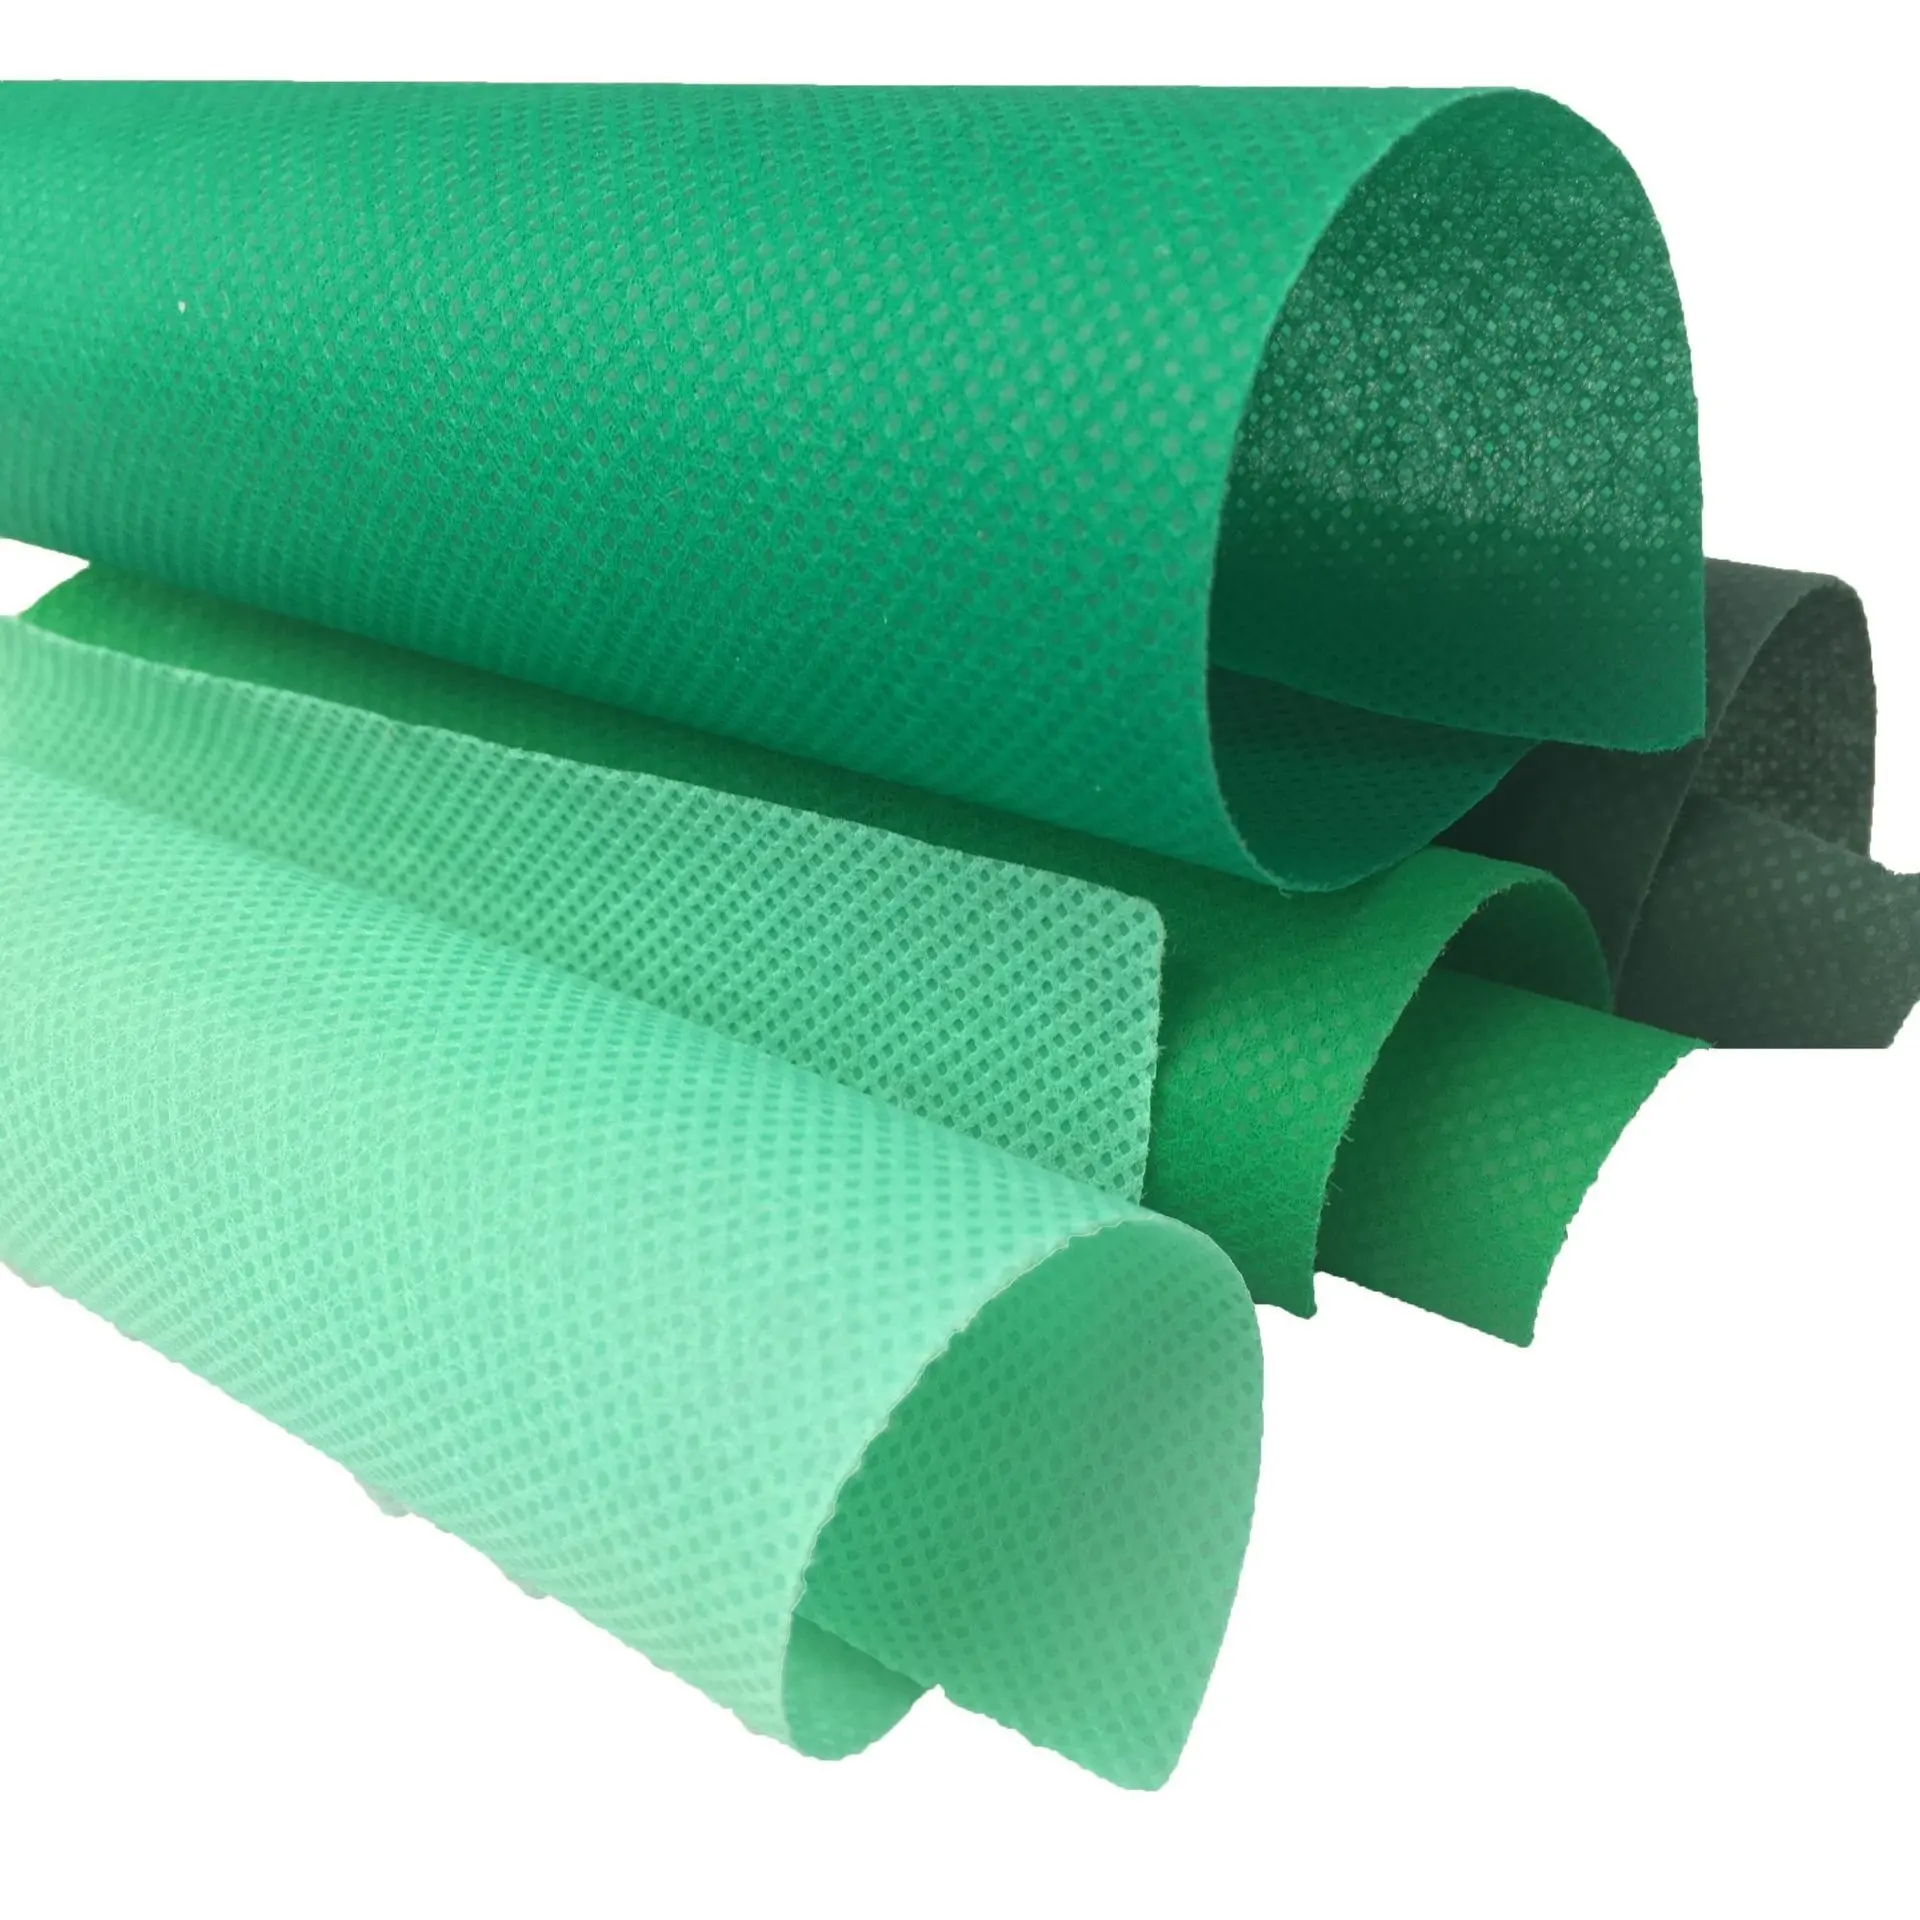 Supply Of PP Spunbond Non-Woven Fabric Polypropylene Non-Woven Fabric Colorful Roll Non Woven Fabric